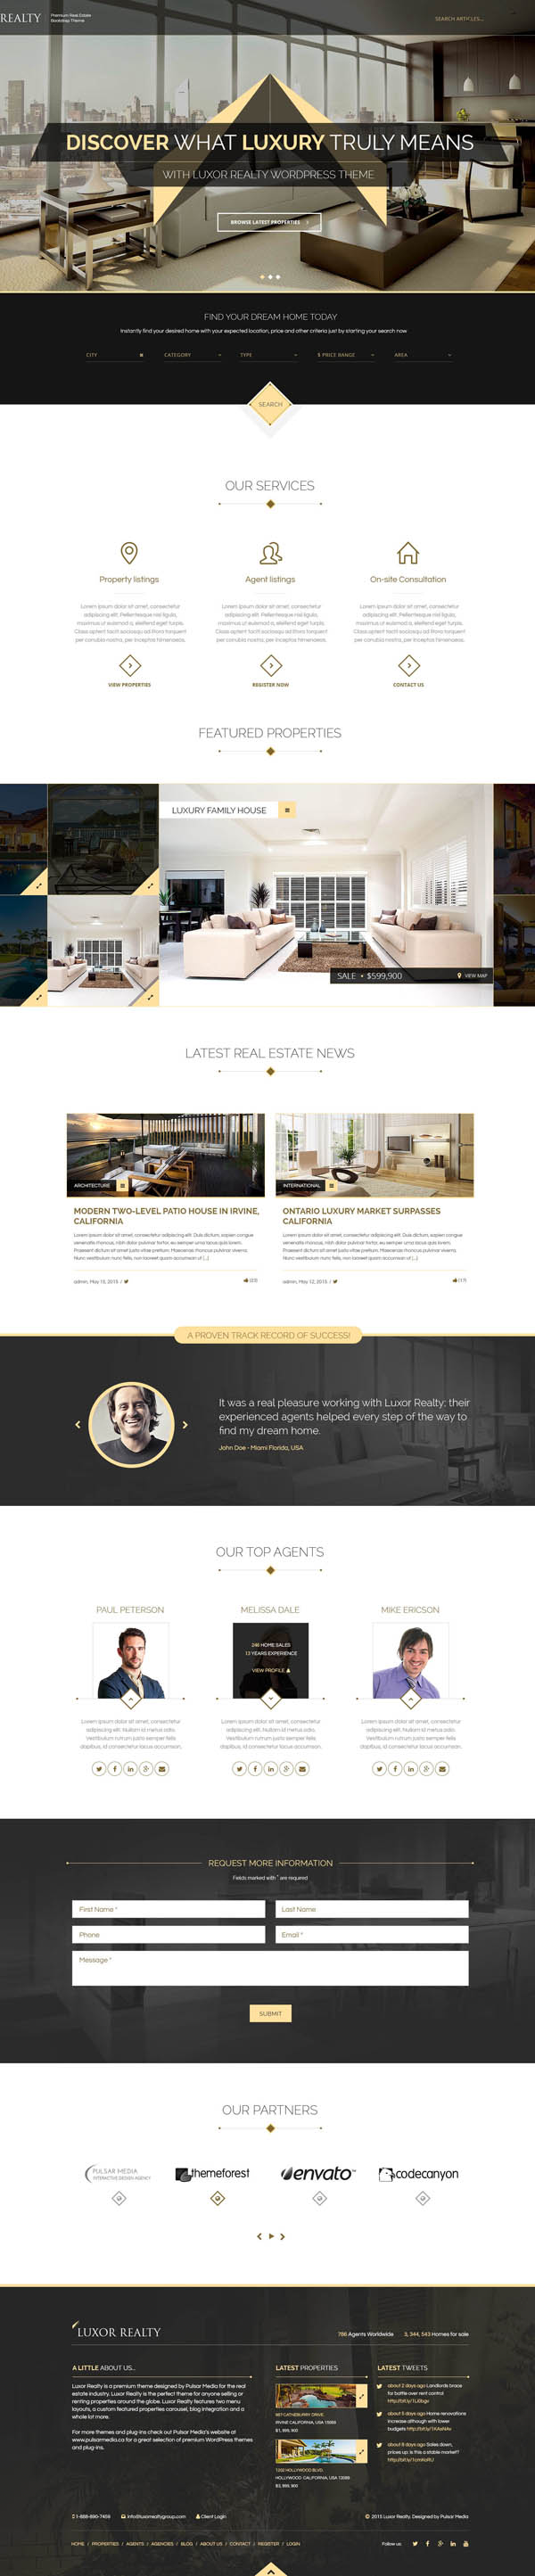 LUXOR - Responsive HTML5 Real Estate Template